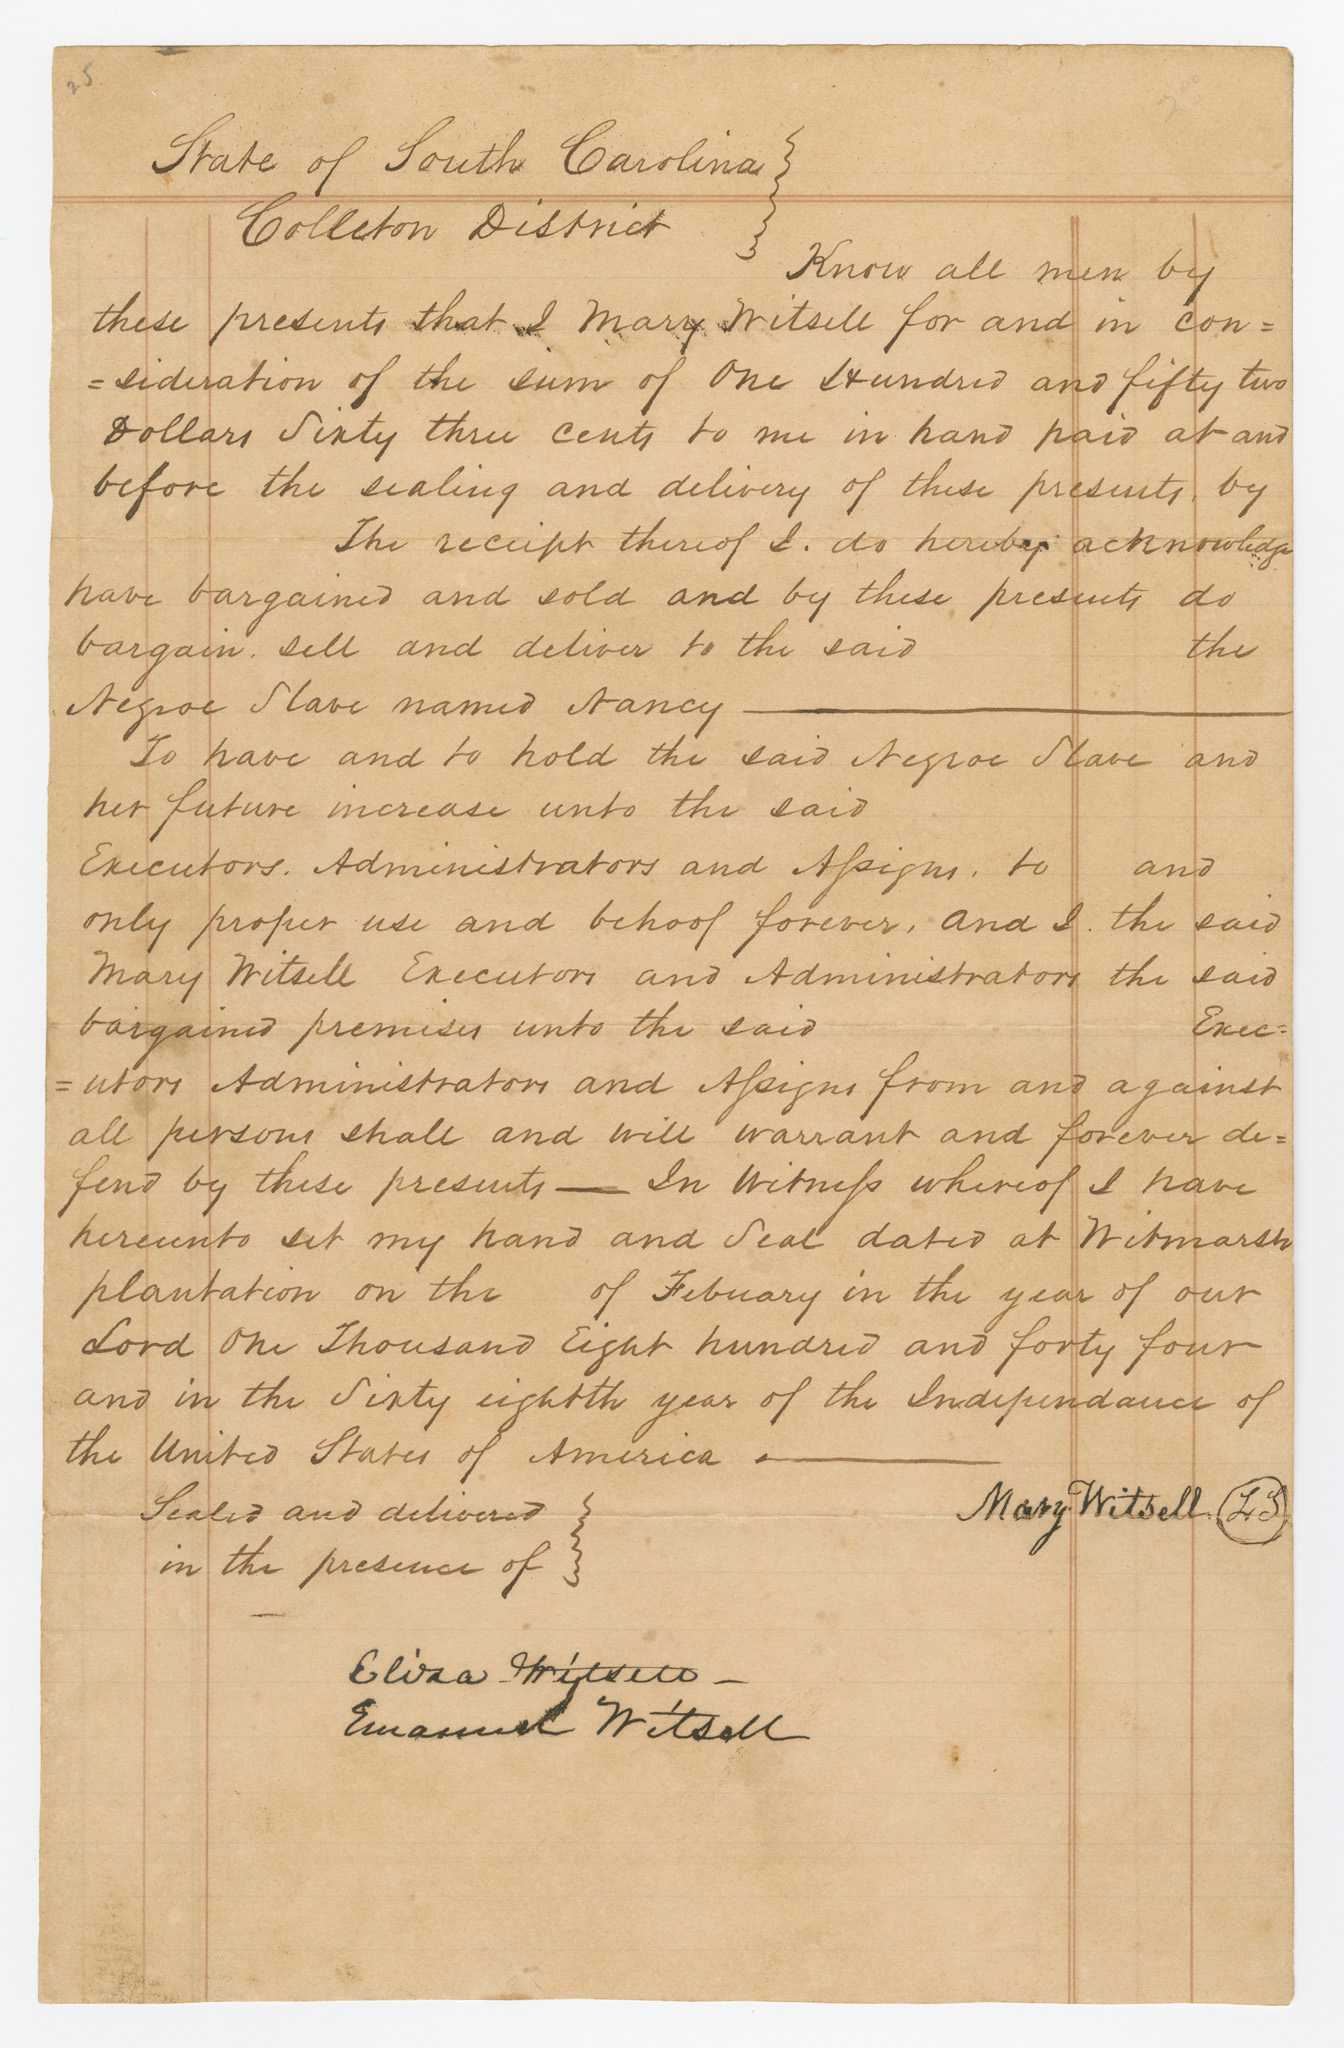 A bill of sale for an enslaved woman named Nancy written at Witmarsh Plantation in the Colleton District of South Carolina by Mary Witsell in February 1844. It is a single page document handwritten in brown ink on linked paper. The price for Nancy is given as $125.63. Spaces remain blank where the buyer's name is to appear, where his or her legal representatives are meant to sign, and where the specific date in February should appear. The document reads in part: [bargain sell and deliver to the said (blank space) the / Negroe Slave named Nancy____ / To have and to hold the said Negroe Slave and / her future increase unto the said (blank space)]. At bottom right, in black ink, is Mary Witsell's signature and handwritten seal. At bottom left, in black ink, is the signature of two witnesses: [Eliza Witsell / Emanuel Witsell]. On the verso, which appears as the front when folded, is handwritten in graphite: Bill of Sale / From Mrs. M Witsell / of girl Nancy / February 1844].